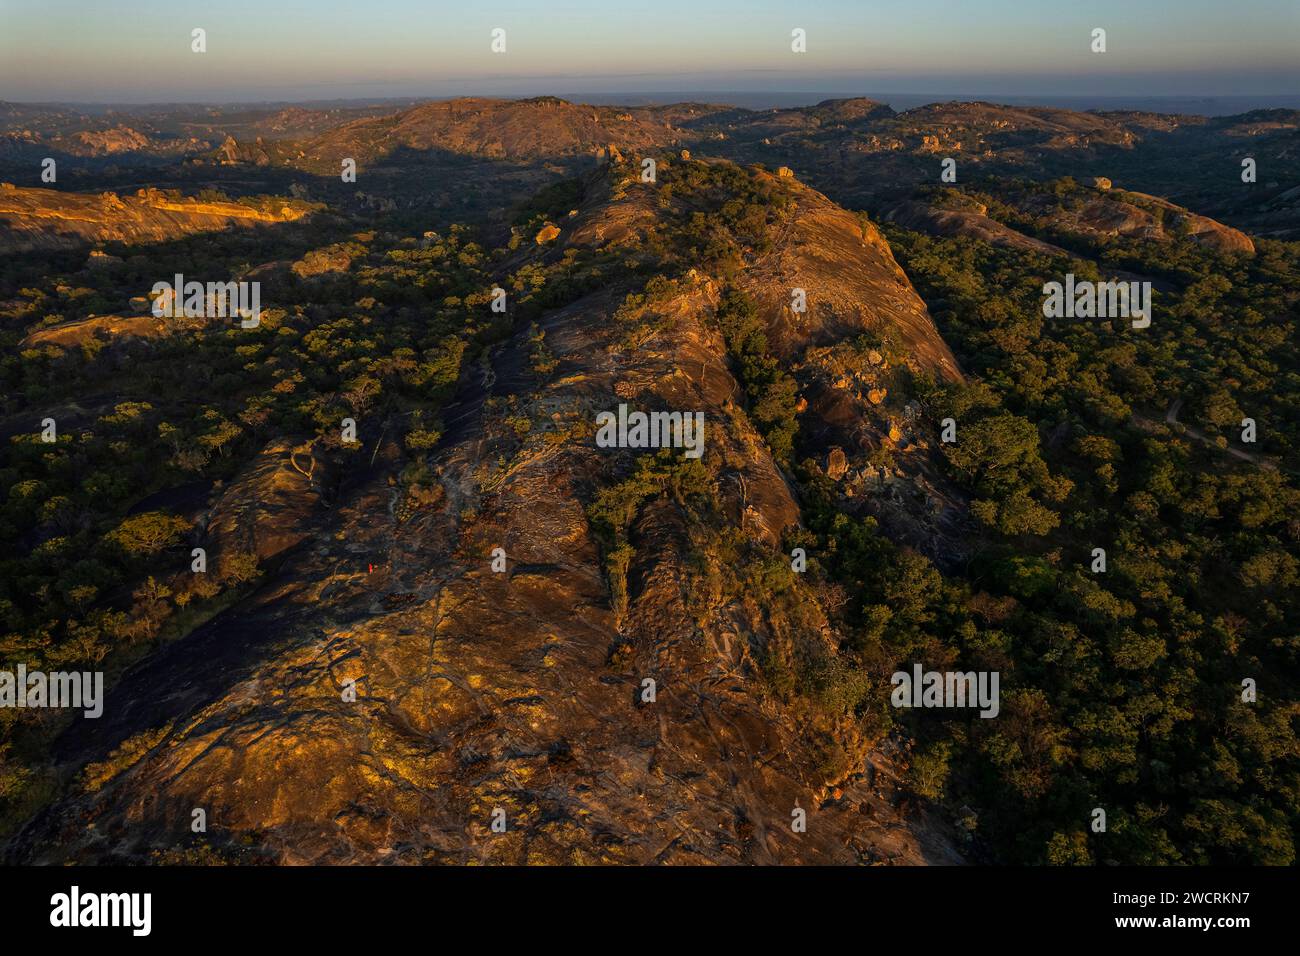 An aerial view of the unique landscape of the Matobo hills in Zimbabwe. Stock Photo